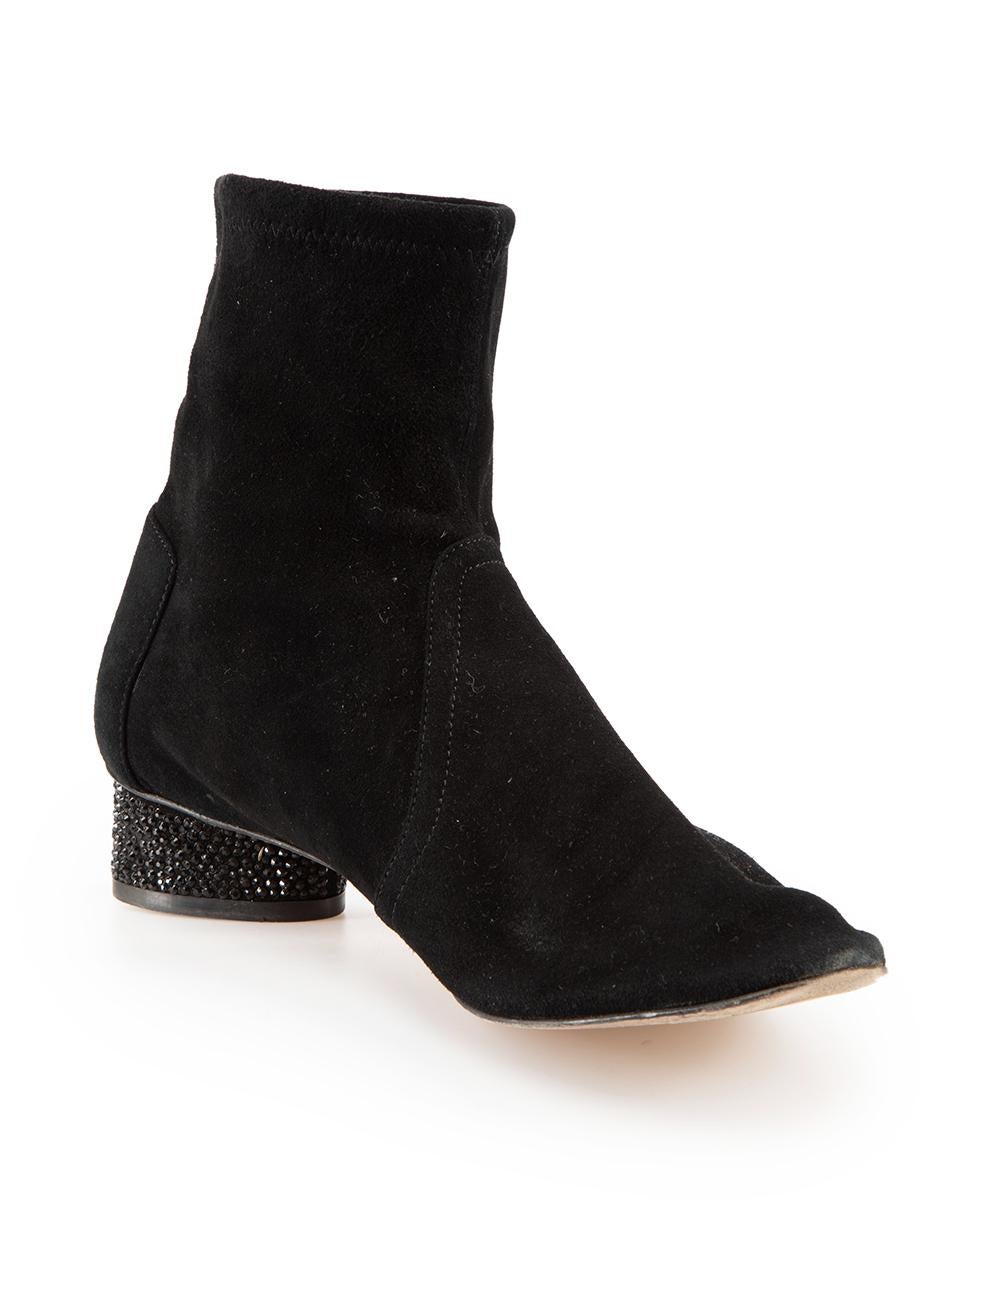 CONDITION is Very good. Minimal wear to boots is evident. Minimal wear to the left boot heel with abrasions to the suede on this used Stuart Weitzman designer resale item.

Details
Black
Suede
Ankle boots
Round toe
Embellished heel
Slip on
Made in